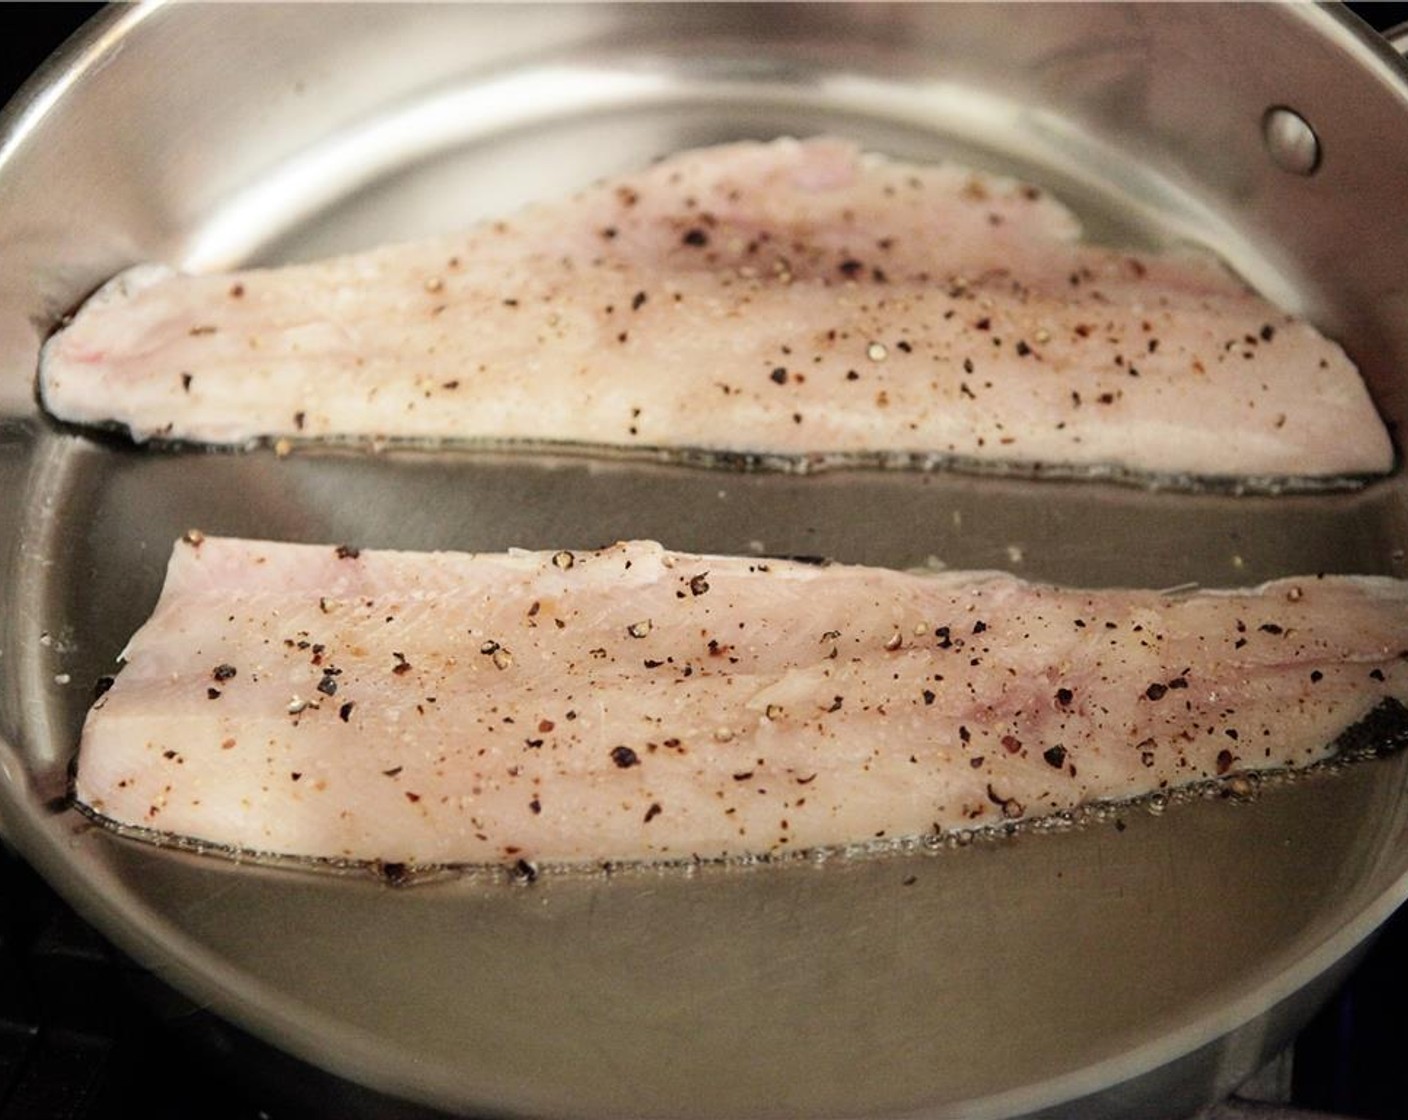 step 6 Heat a sauté pan over medium-high heat. Coat the bottom of the pan with Olive Oil (2 Tbsp). Continue to heat until the oil begins to lightly smoke. Without overcrowding, add the fish, skin-side down.